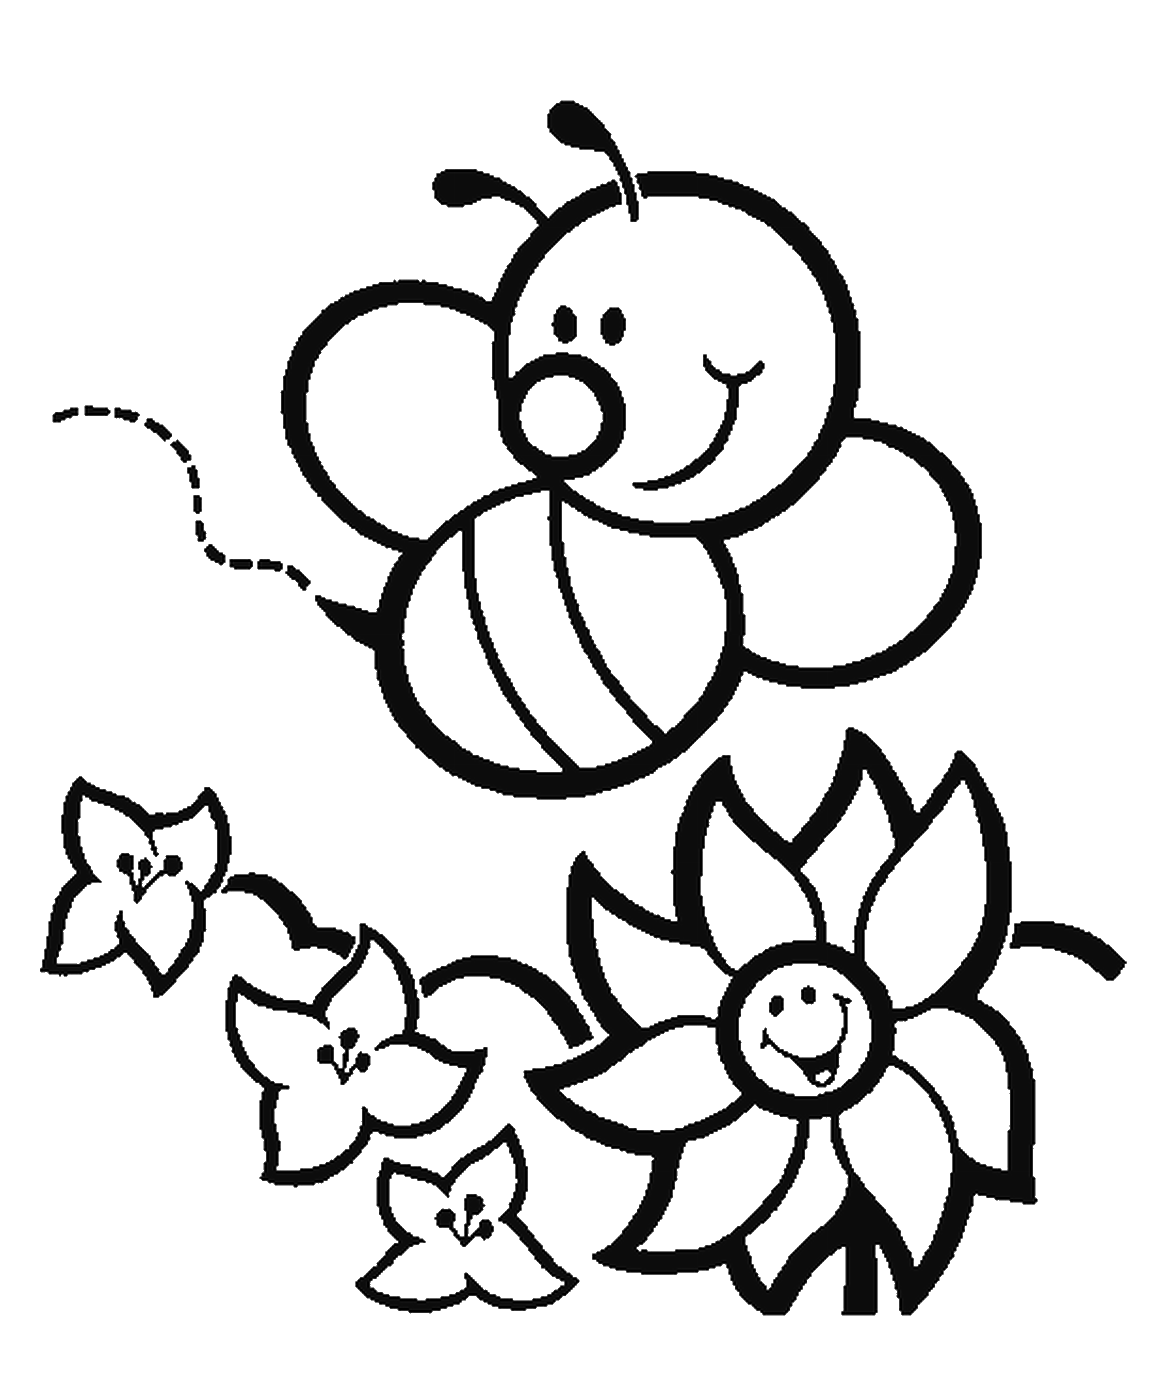 bumble bee coloring pages printable this is bumble bee coloring pages bee coloring pages bumble bee pages printable coloring 